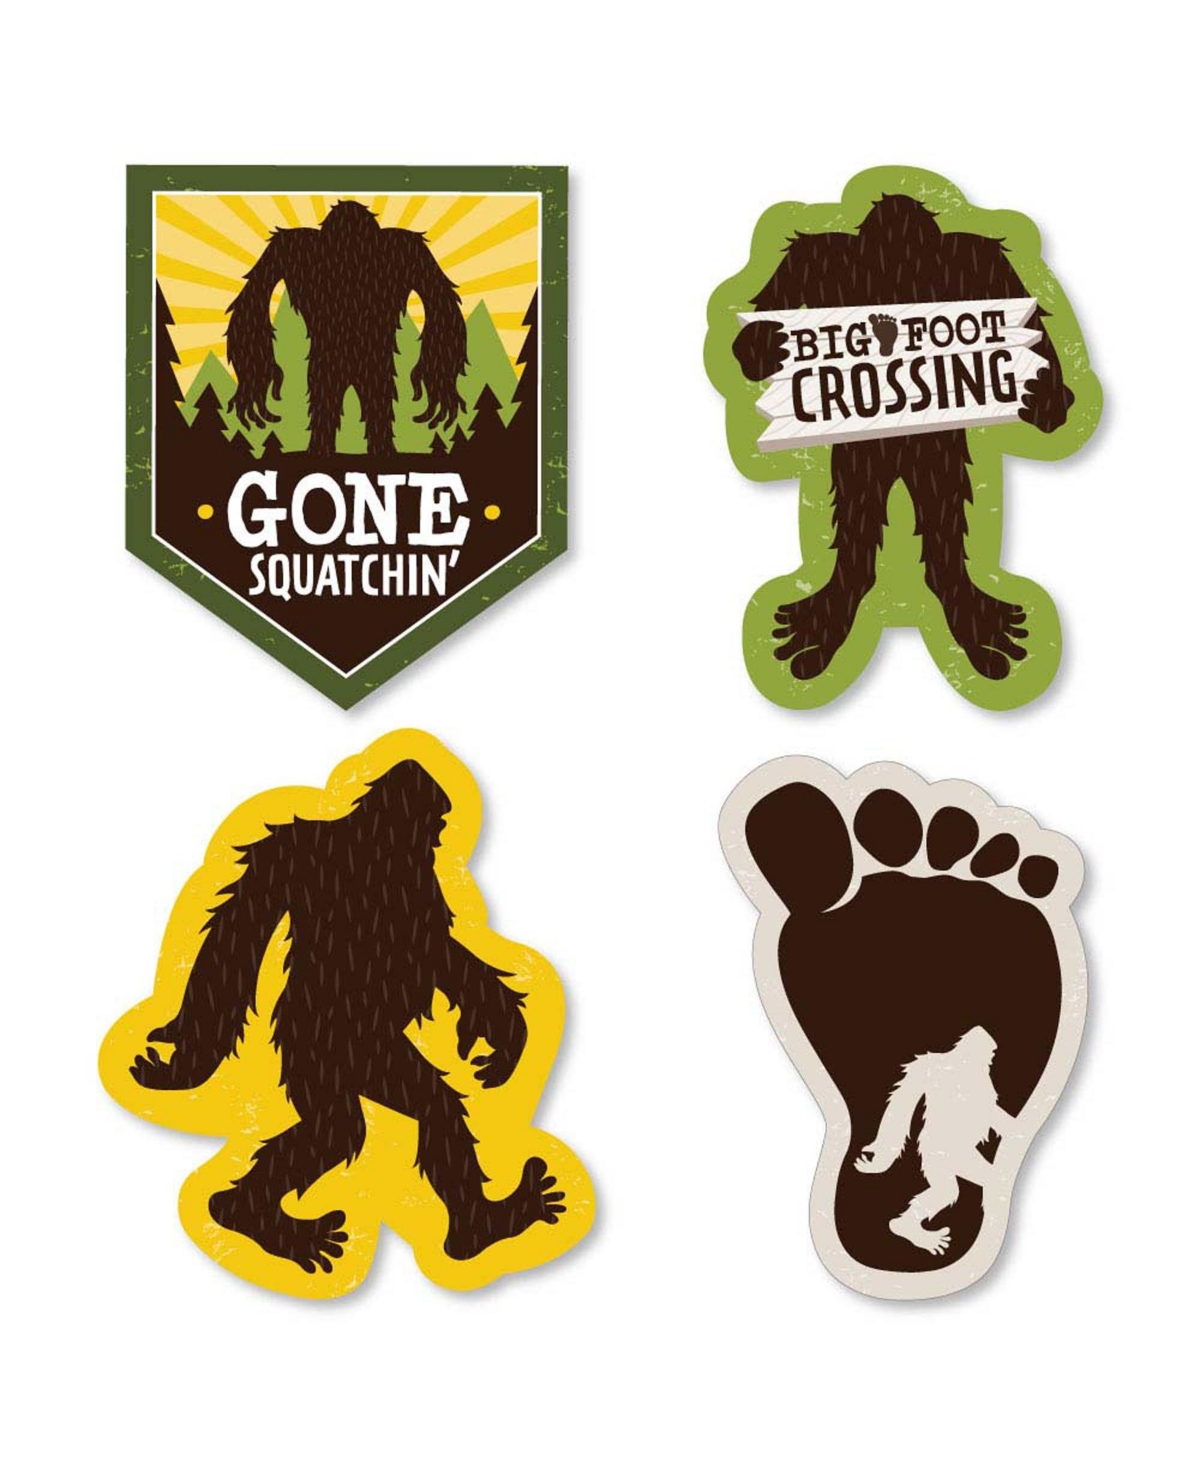 Sasquatch Crossing - Diy Shaped Bigfoot Party or Birthday Party Cut-Outs - 24 Ct